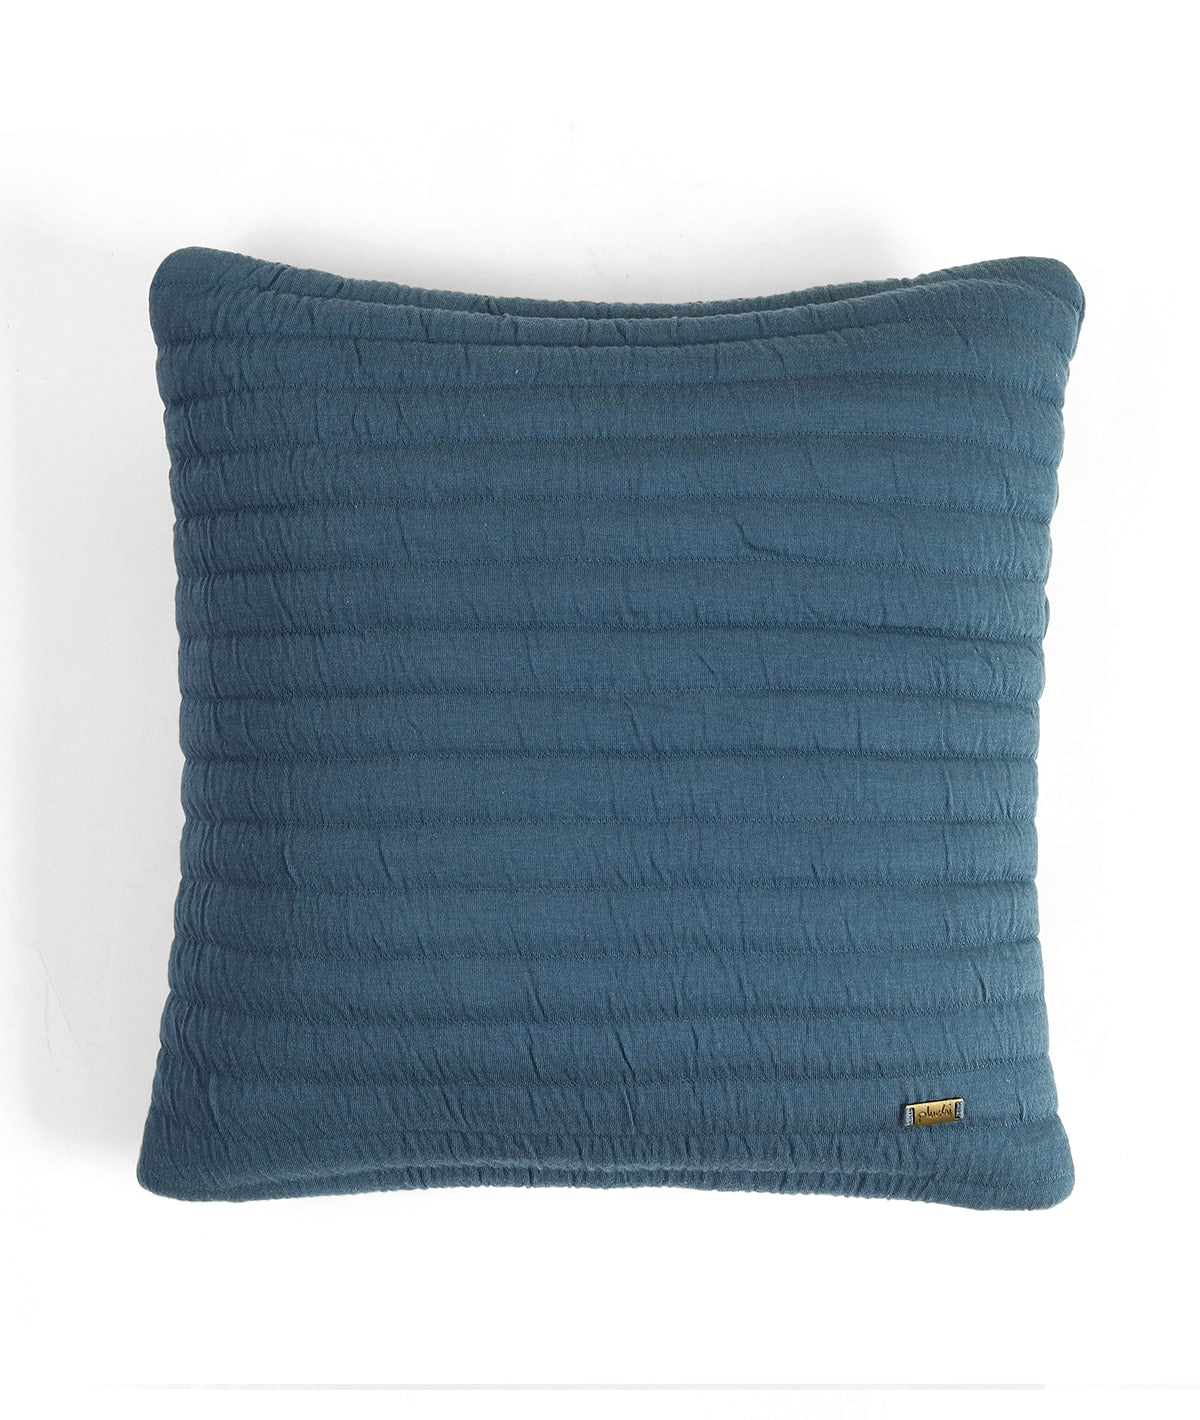 Waseme Steel Blue & Cadet Blue Cotton Knitted Quilted Decorative 18 X 18 Inches Cushion Cover